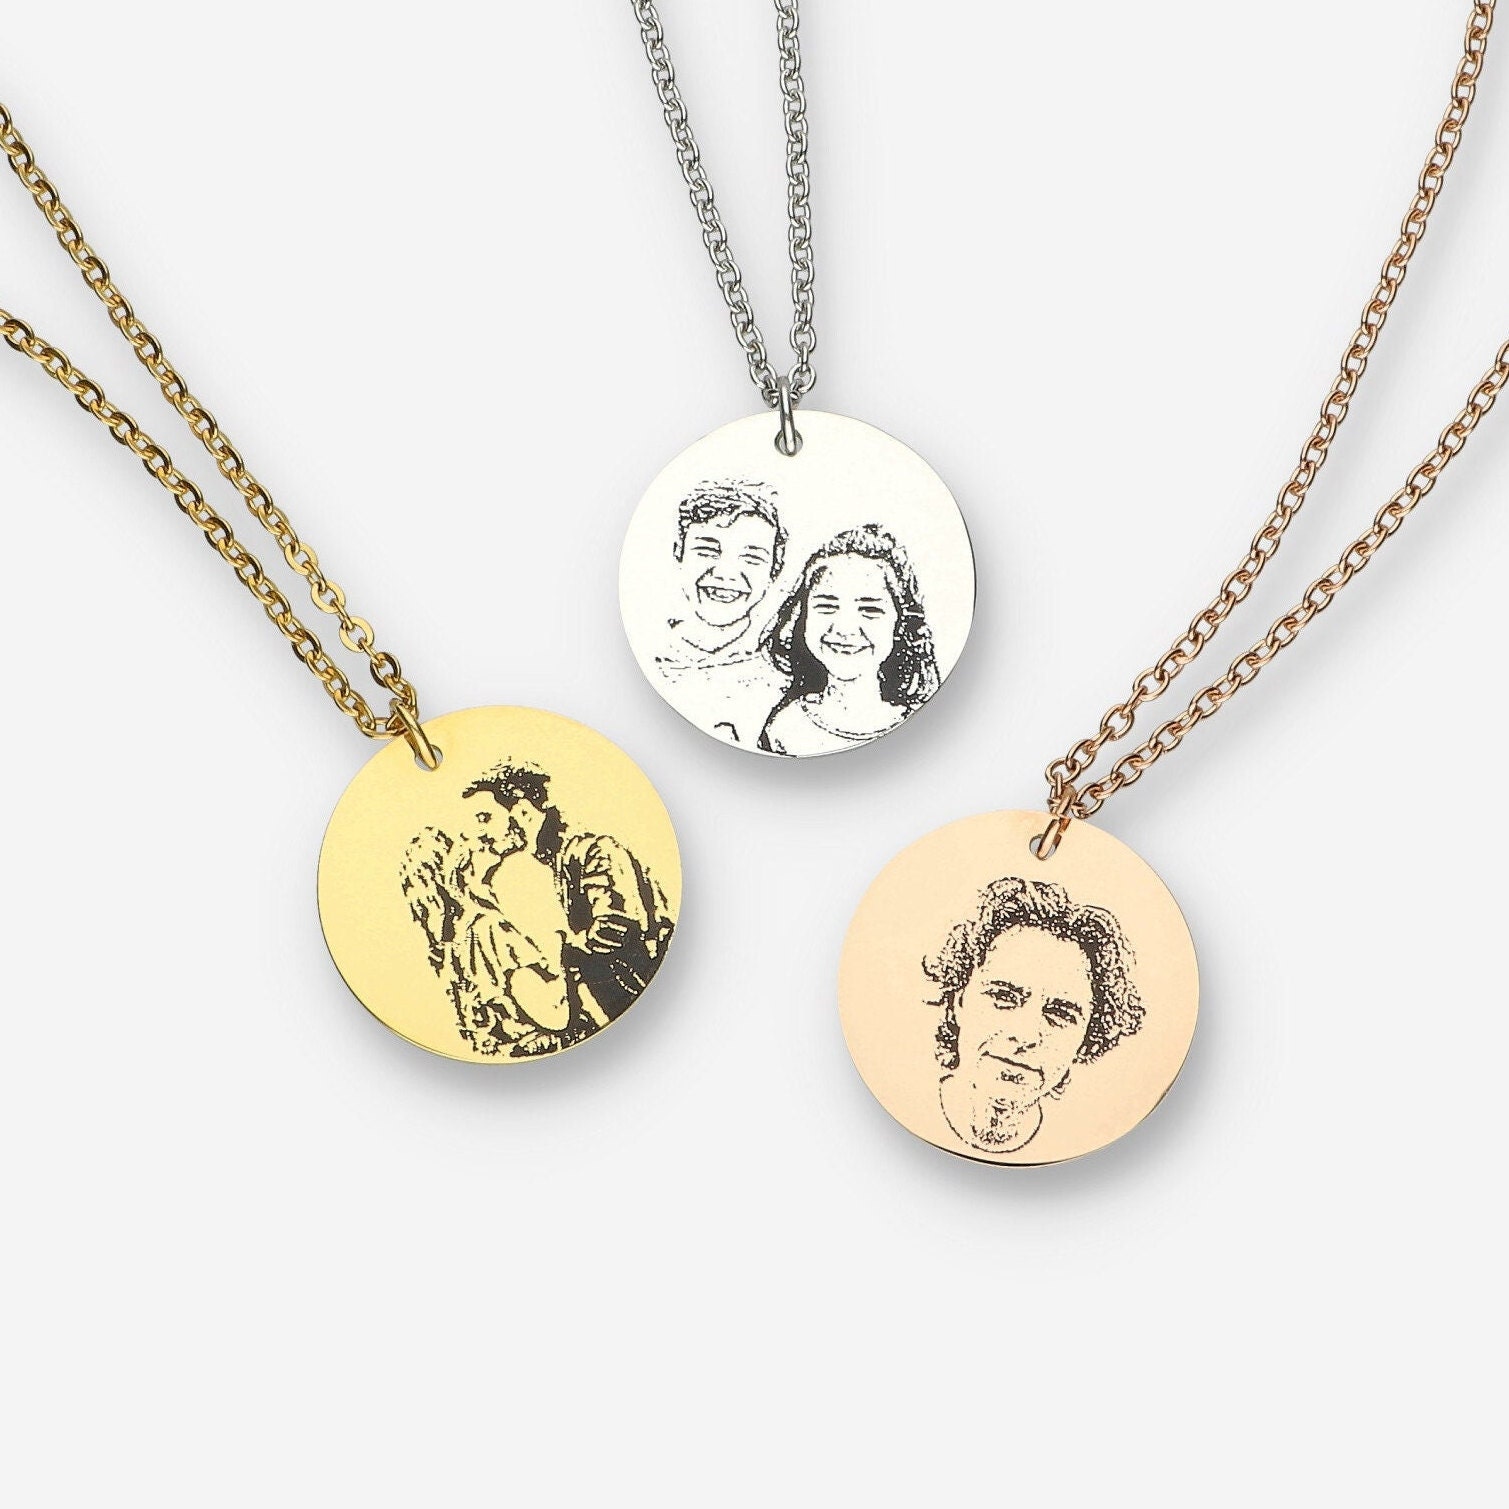 Buy Engraved Photo Necklace Online In India - Etsy India